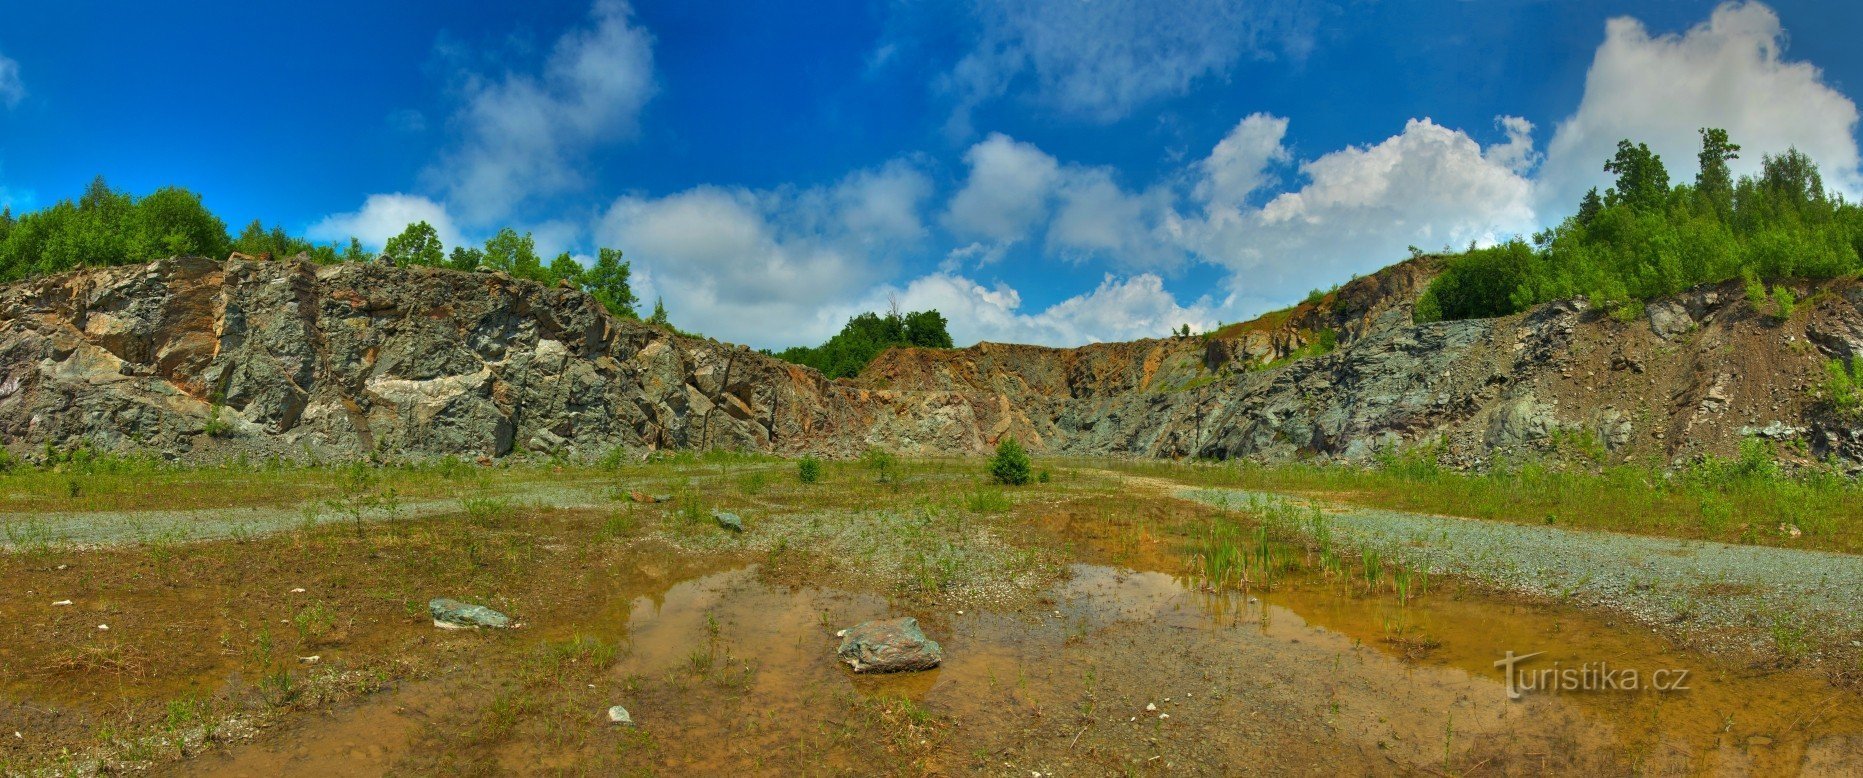 The eastern part of the Masta quarry after the rain